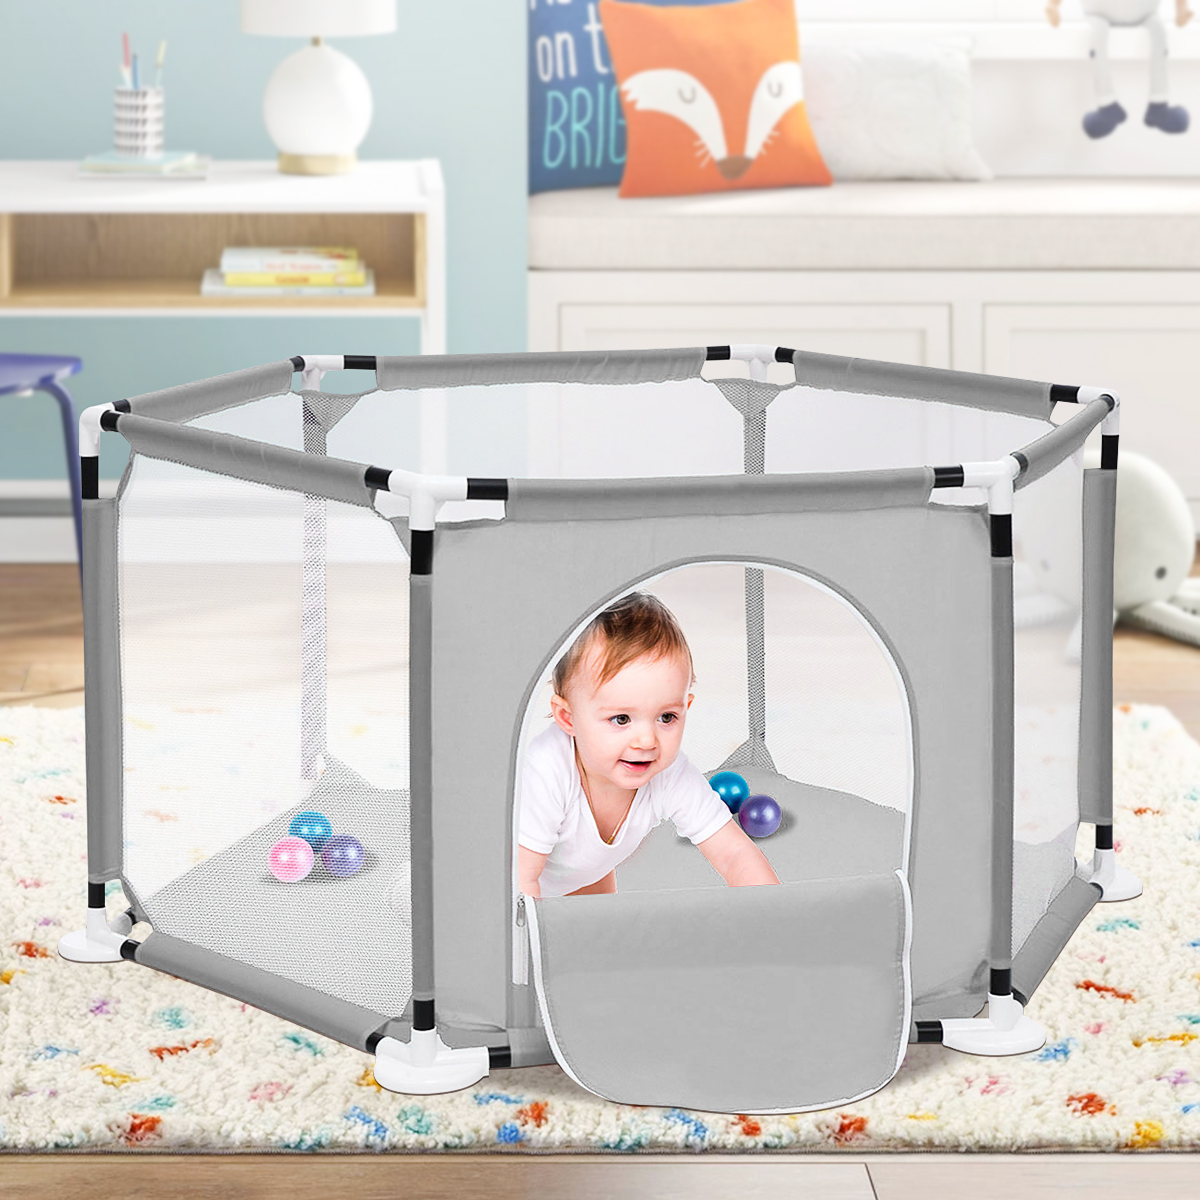 "SINGES Deluxe Portable Baby Playpen, 6-Panel Play Yard with Breathable Mesh & Zipper Door, Indoors or Outdoors Play Space Interactive  Fence for Babies Toddler Infant,Grey" - image 6 of 8